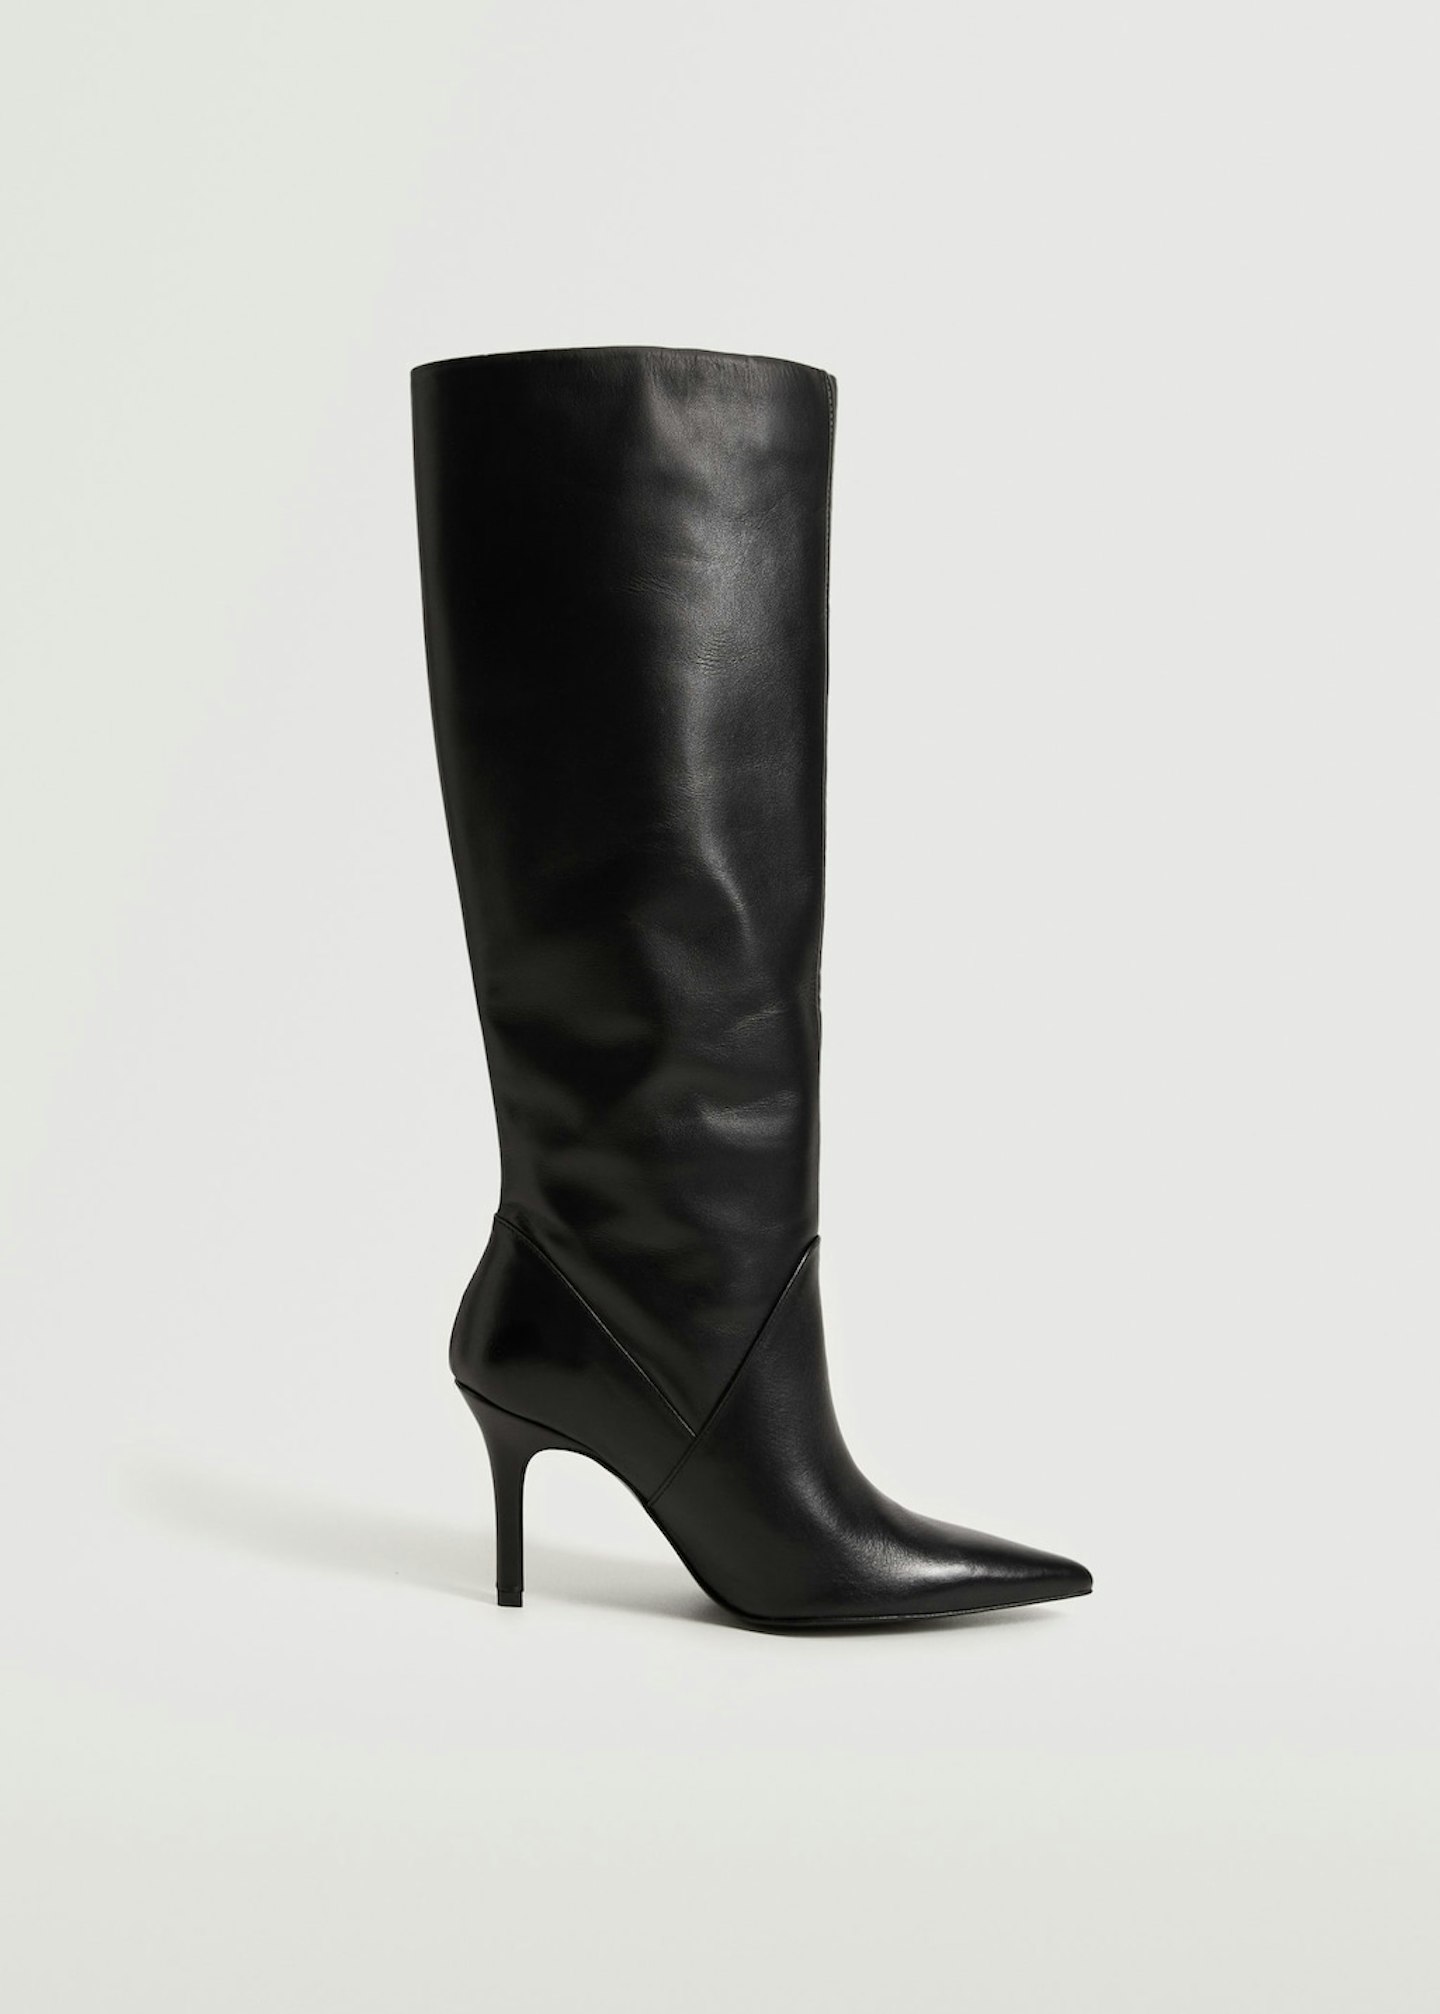 High Heel Leather Boot, WAS £149.99 NOW £119.99